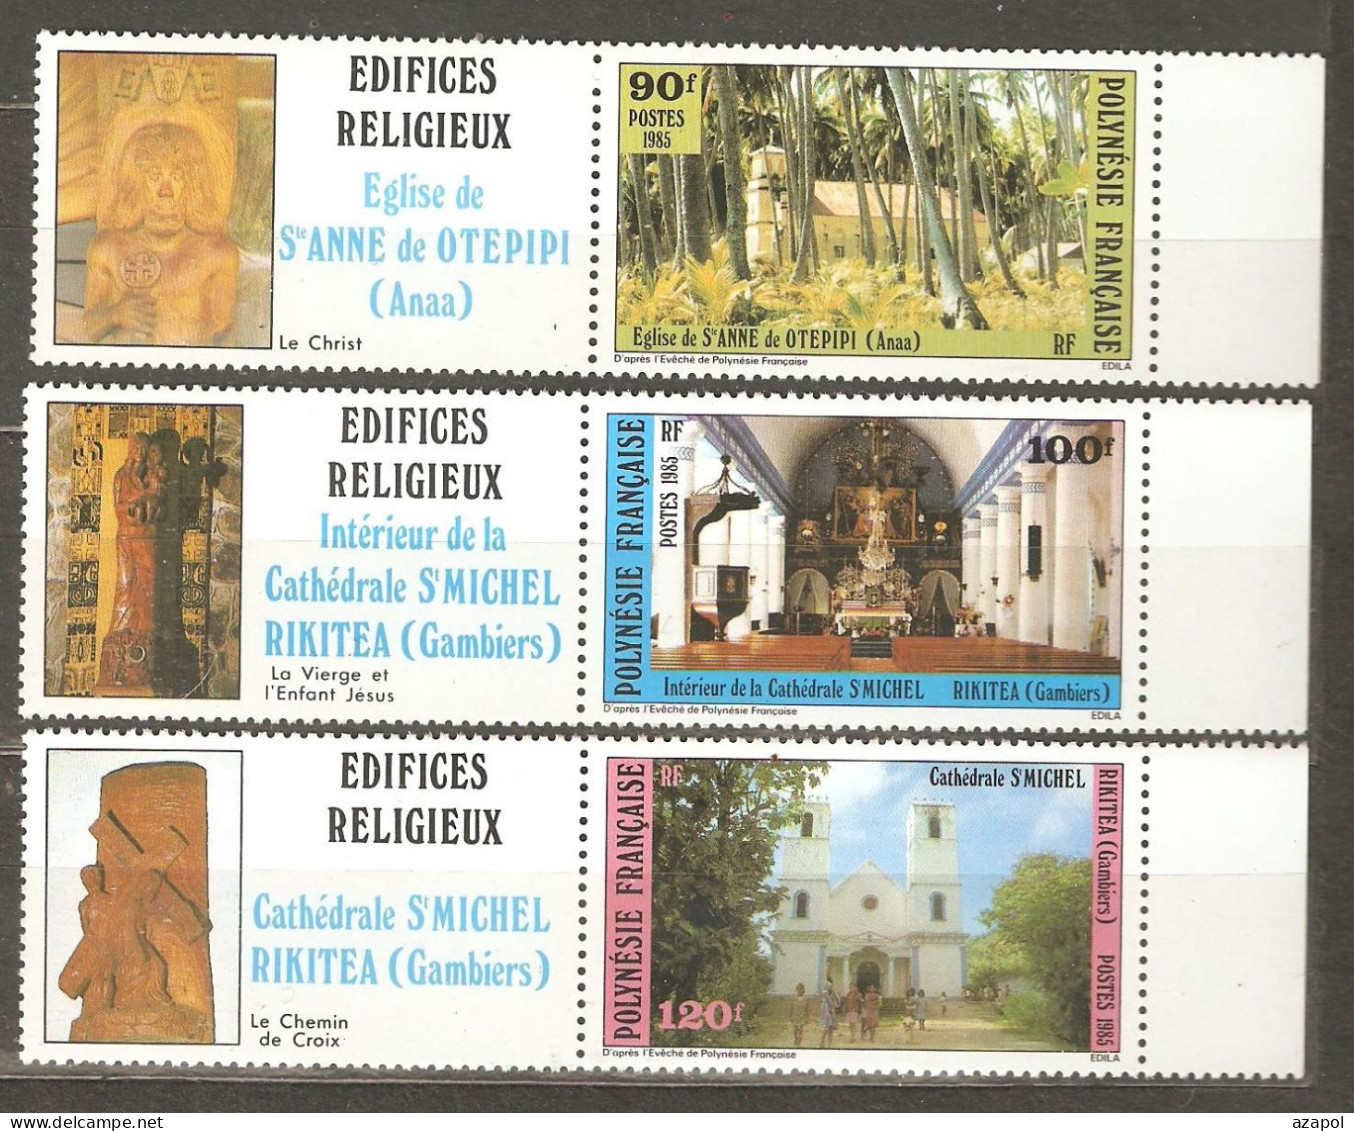 Polynesia: Full Set Of 3 Mint Stamps With Labels, Catholic Churches, 1985, Mi#439-441, MNH - Ungebraucht